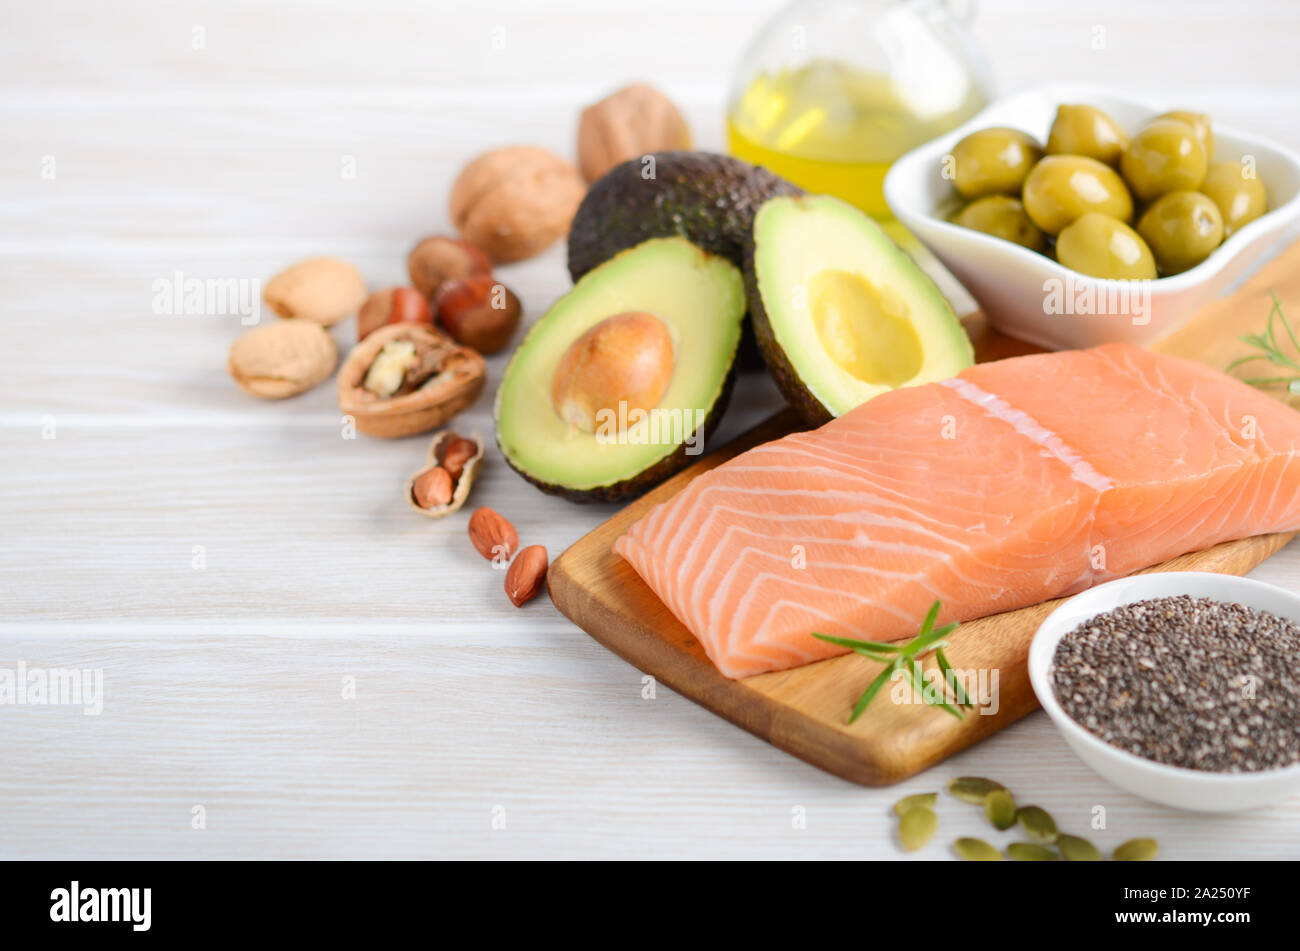 Selection of healthy unsaturated fats, omega 3 - fish, avocado, olives, nuts and seeds. Stock Photo